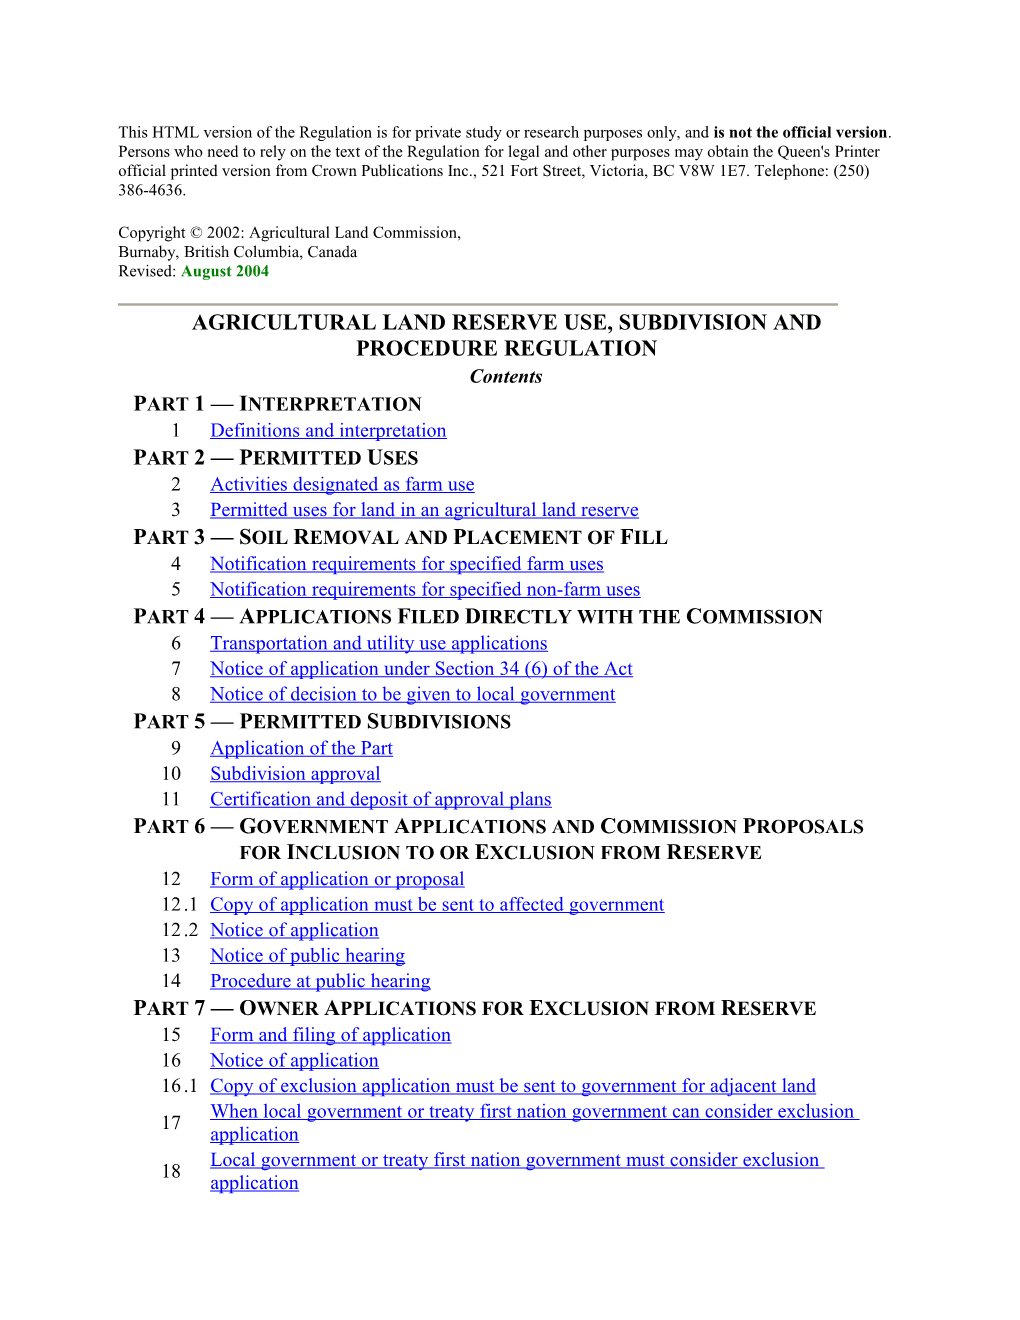 This HTML Version of the Regulation Is for Private Study Or Research Purposes Only, And